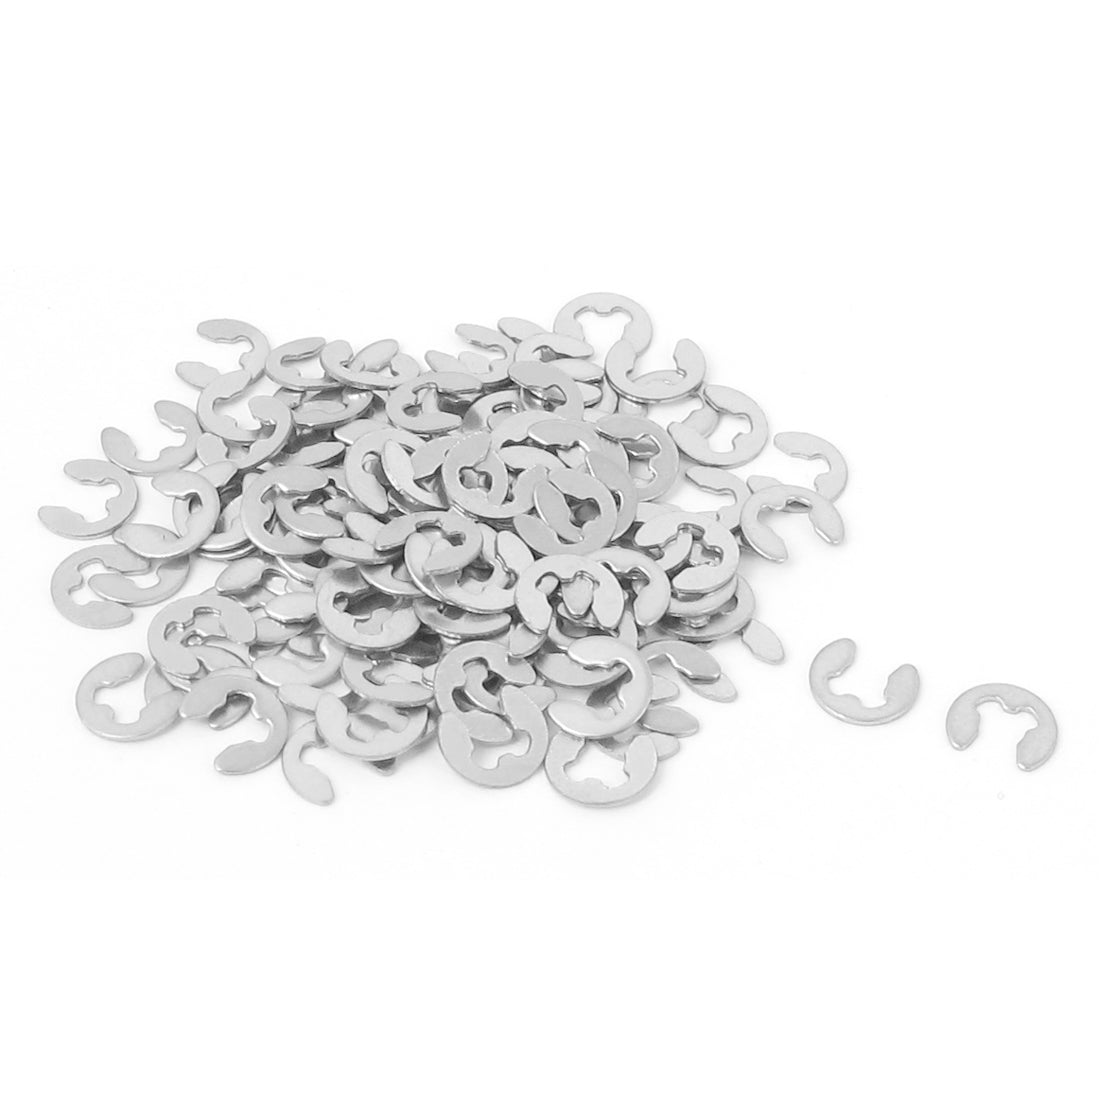 uxcell Uxcell 100pcs 304 Stainless Steel Fastener External Retaining Ring E-Clip Circlip 2.5mm